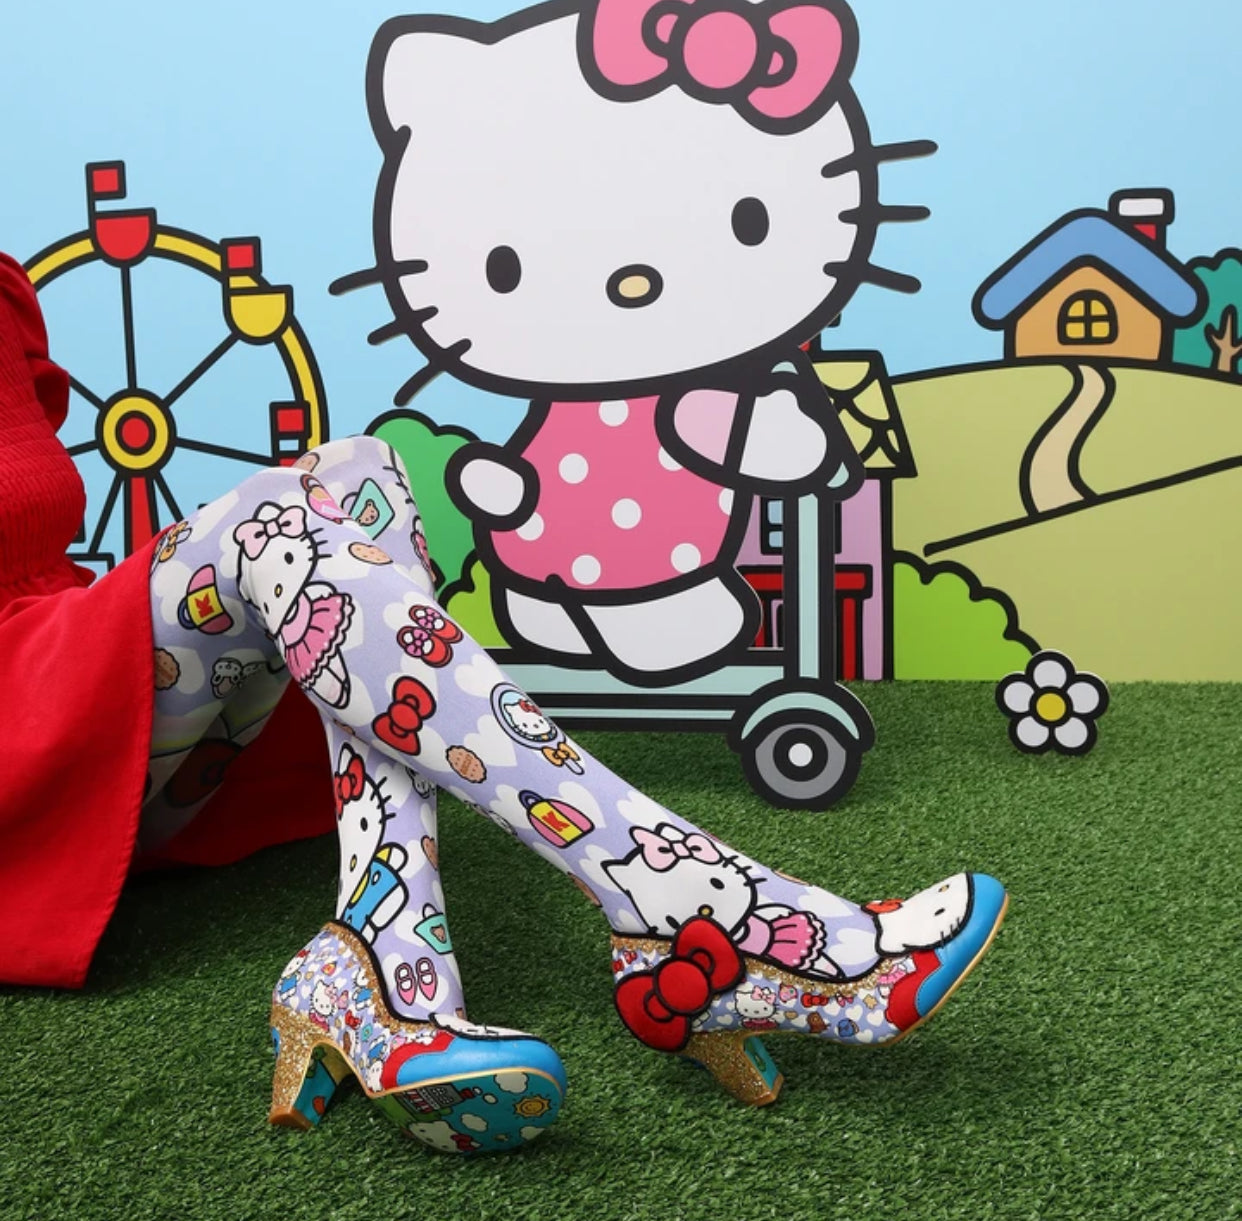  Hello Kitty Tights For Women